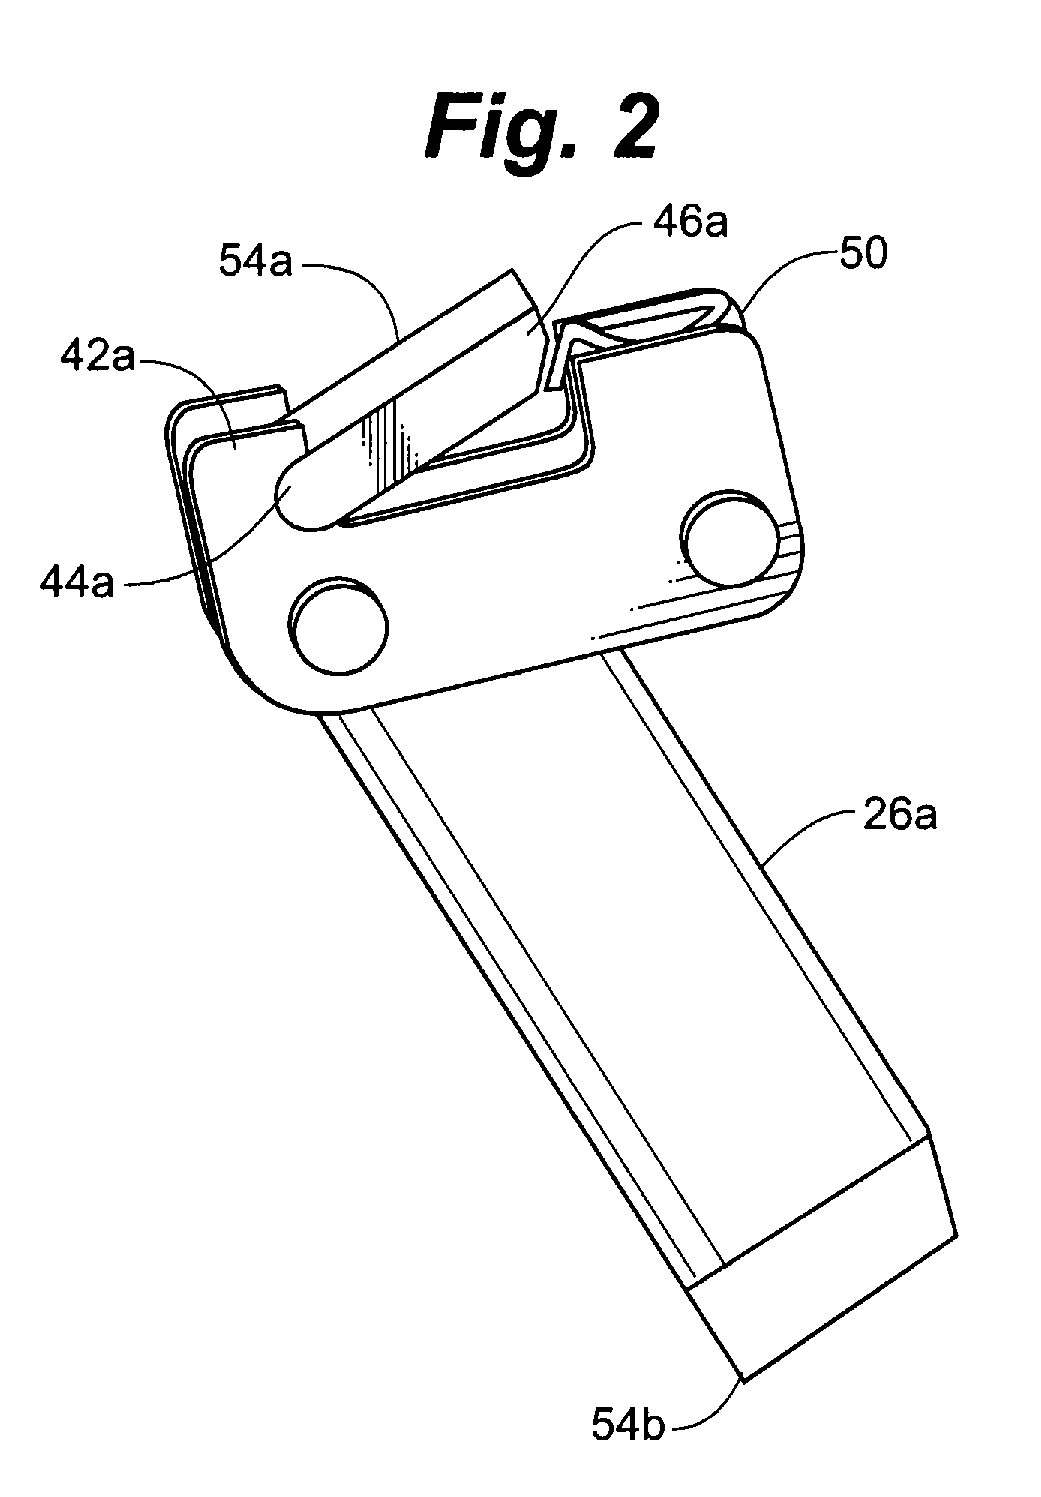 Methods and apparatus for surgical retraction